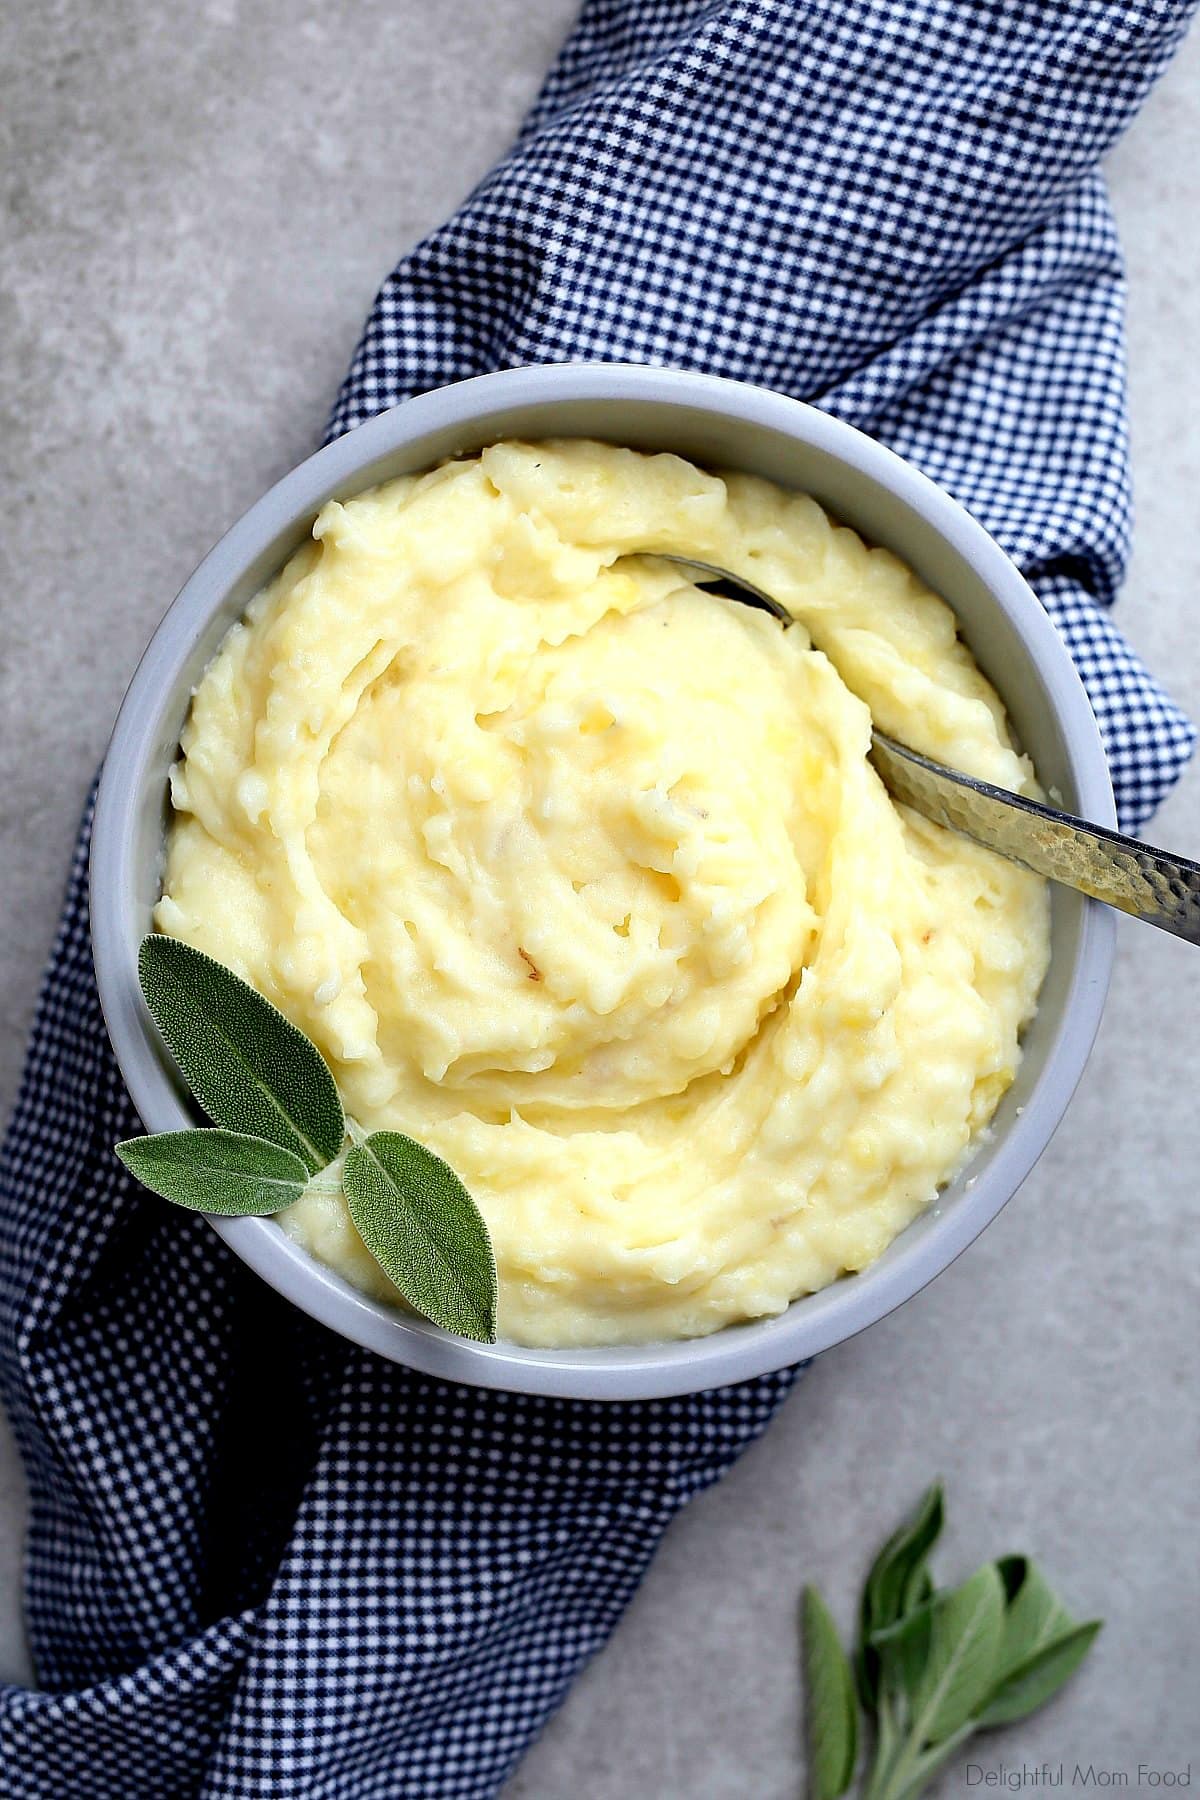 sage butter infused into roasted garlic mashed potatoes mashed and mixed served in a bowl with a dish towel and fresh sage leaves